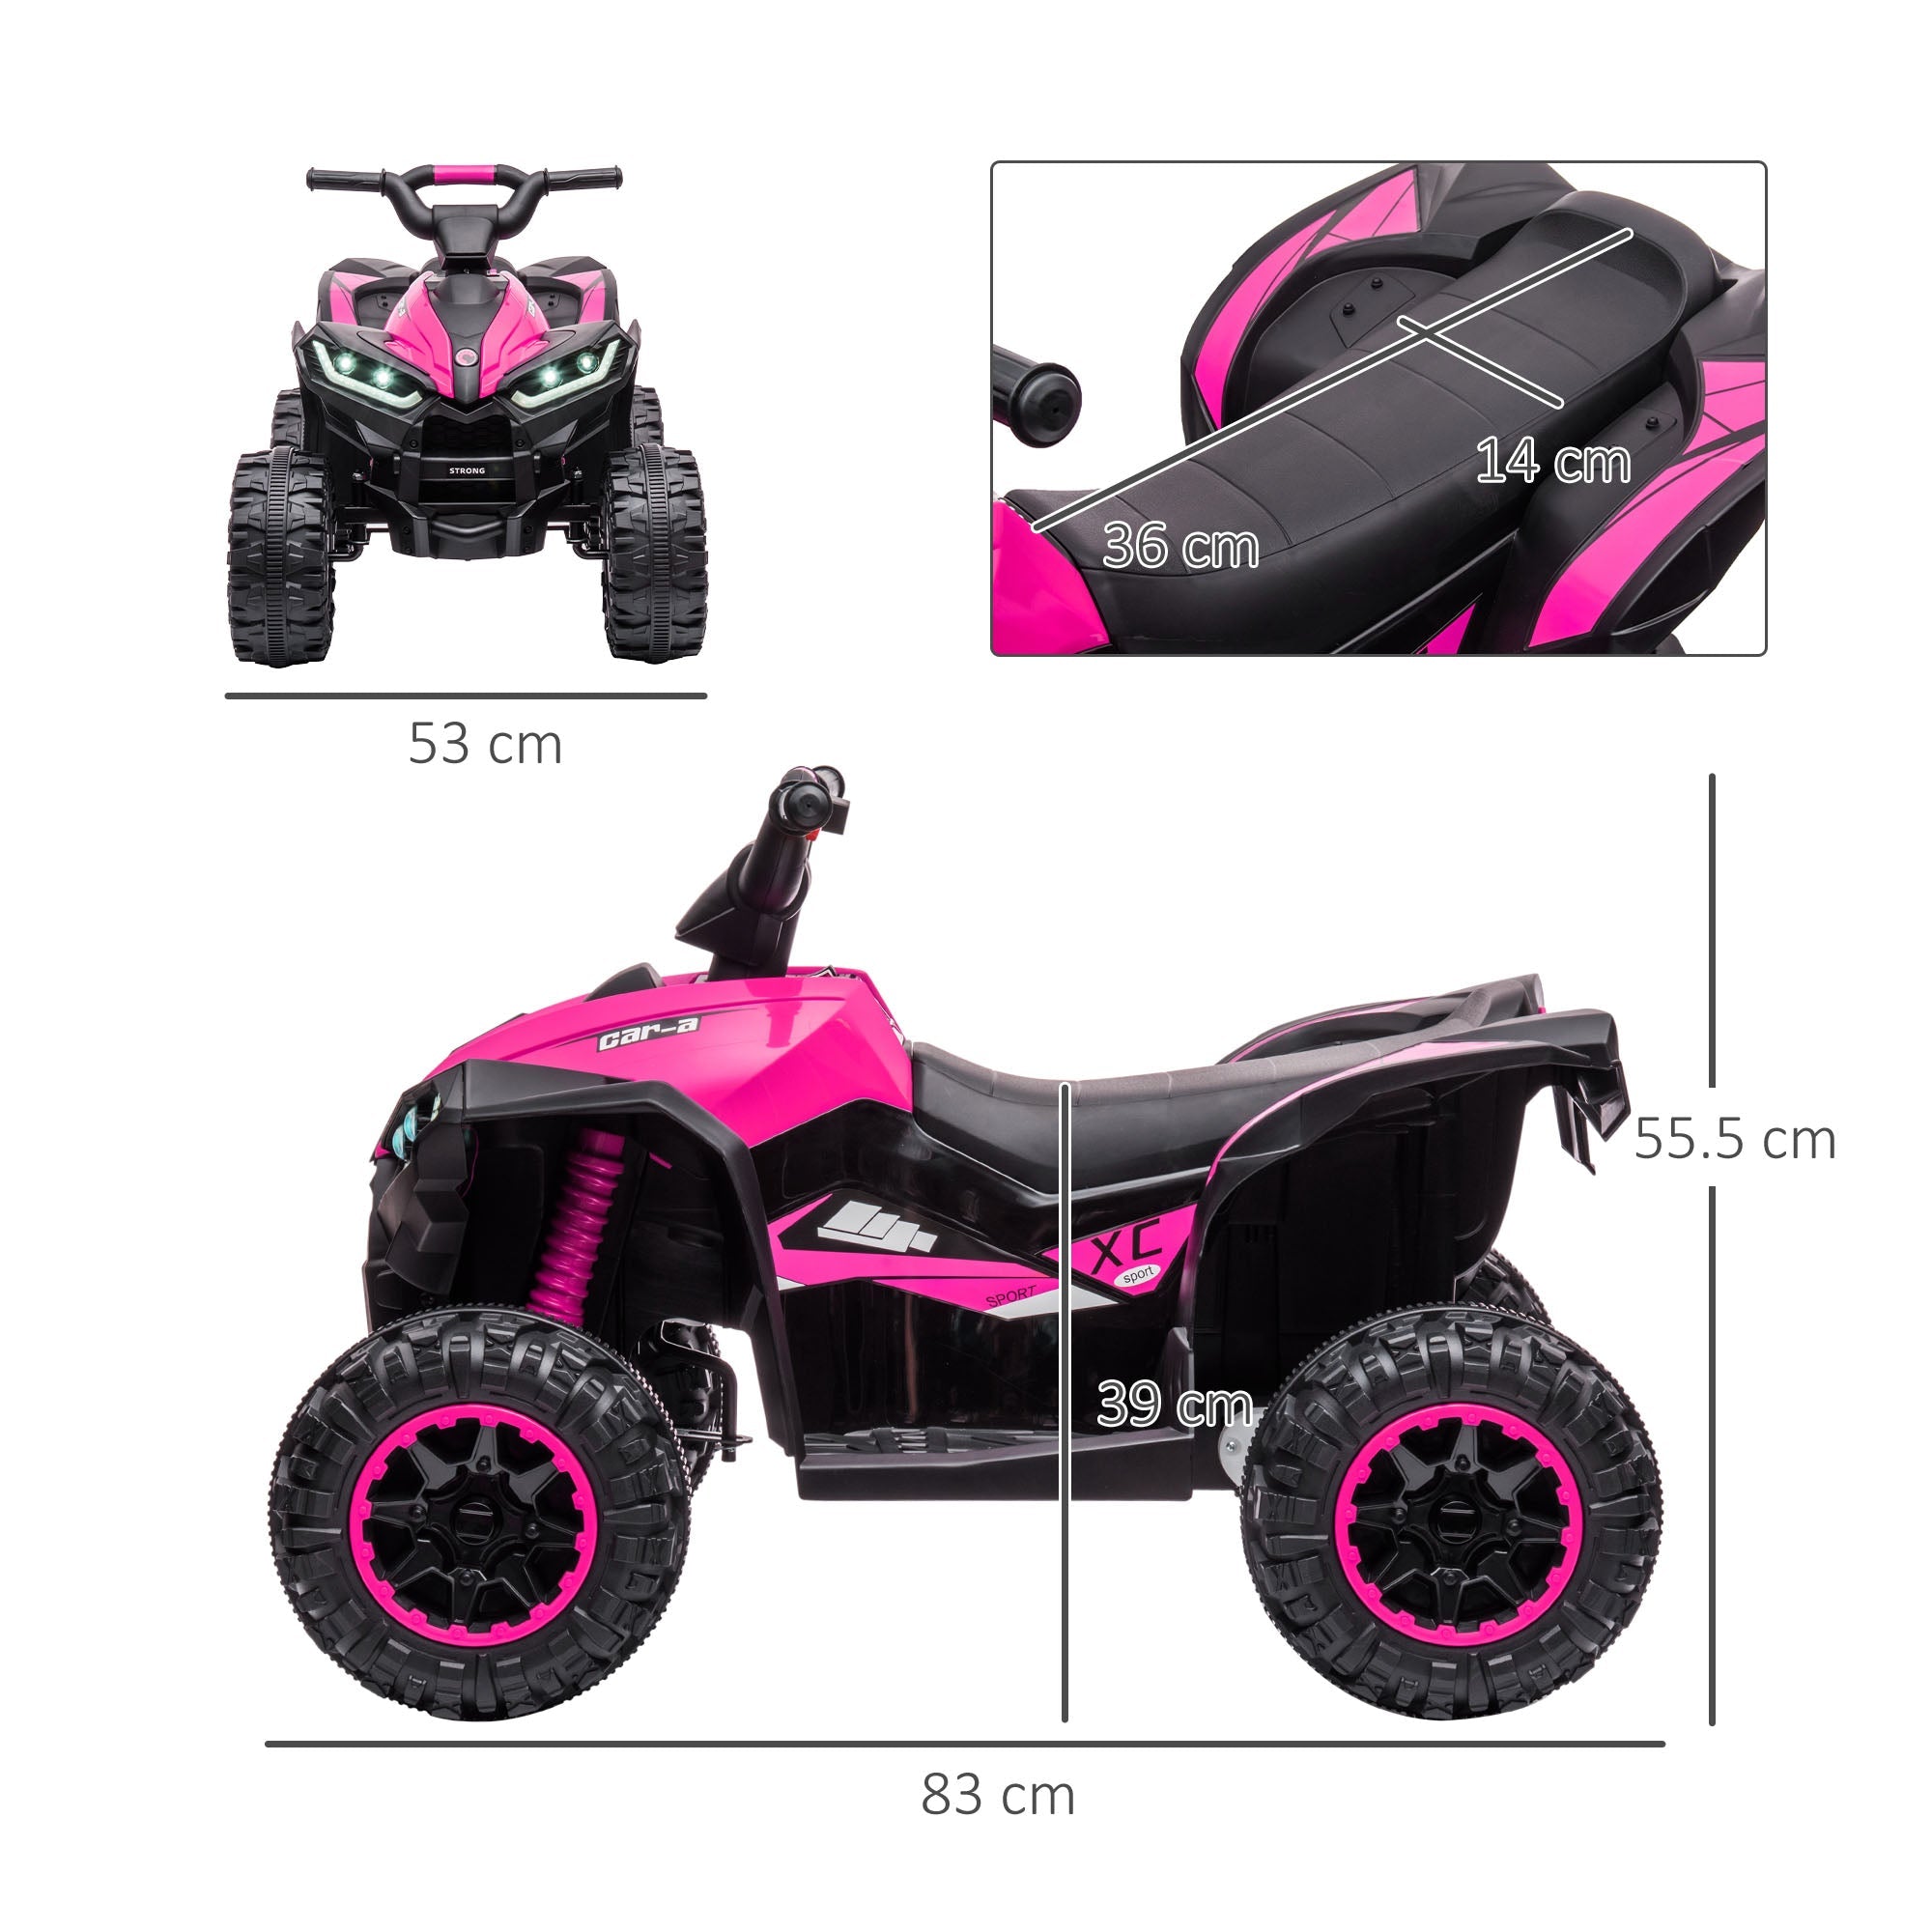 12V Quad Bike with Forward Reverse Functions, Ride on Car ATV Toy with High/Low Speed, Slow Start, Suspension System, Horn, Music, Pink-2